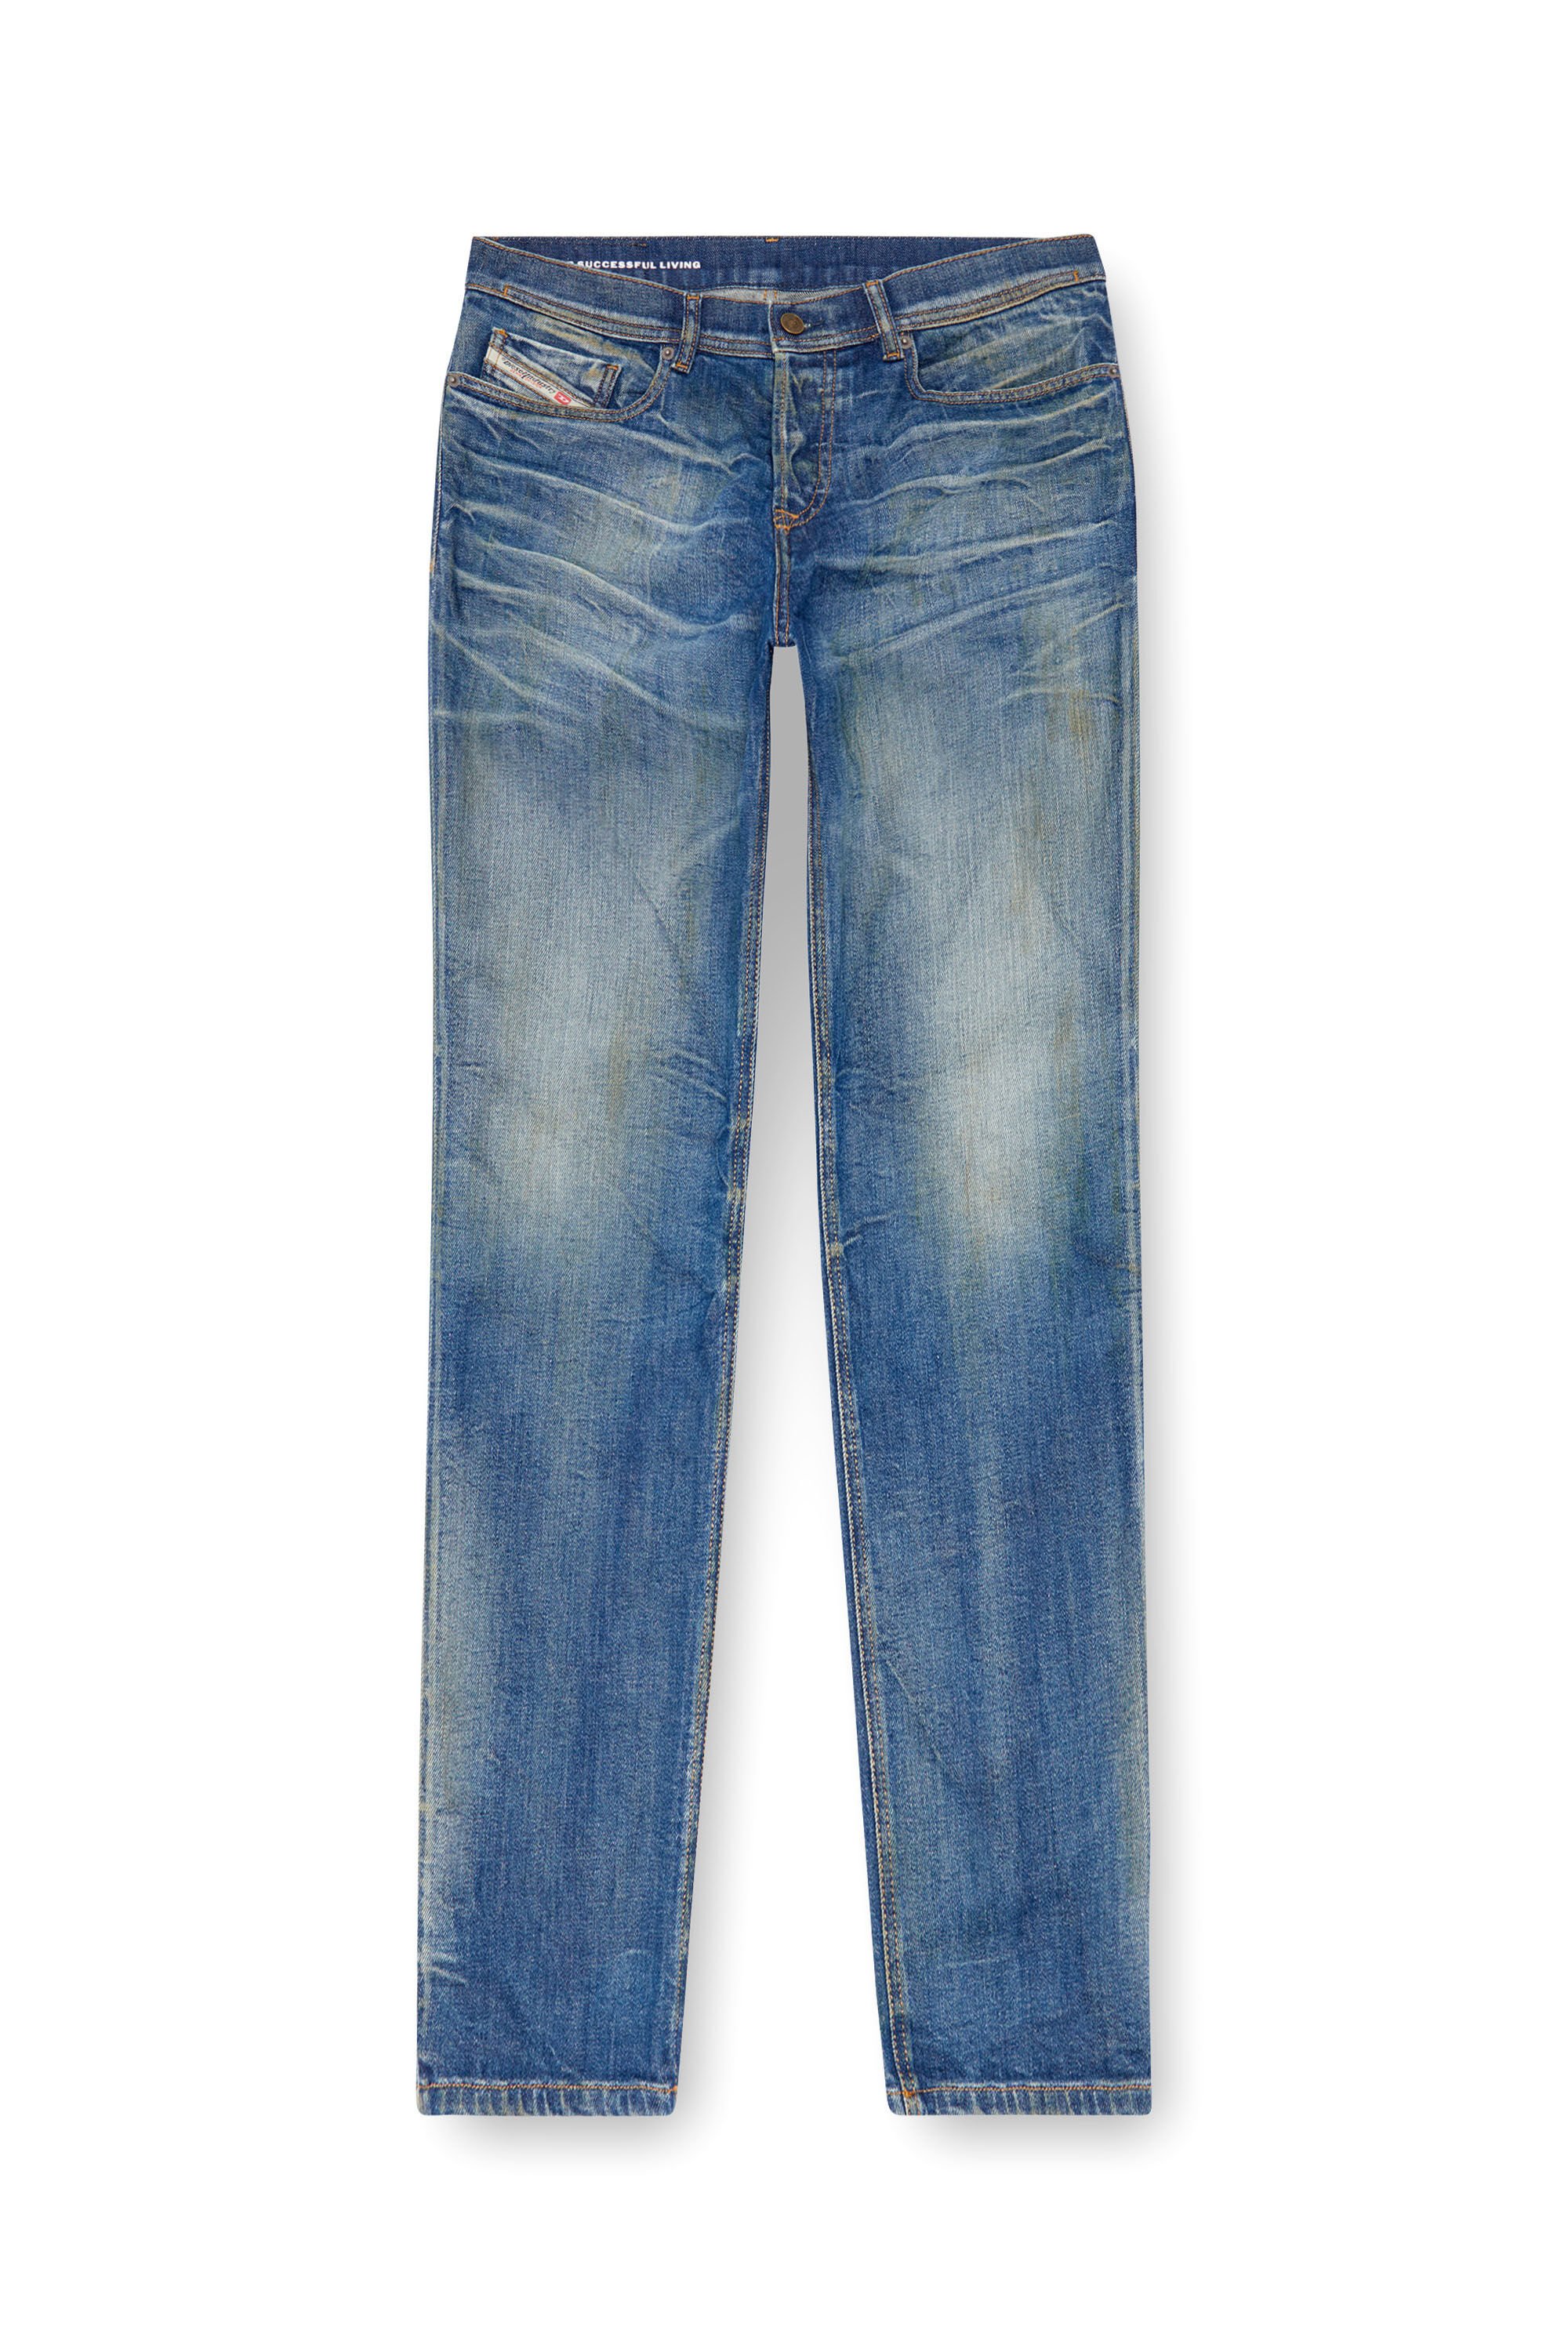 Diesel - Tapered Jeans 2023 D-Finitive 09J66, Hombre Tapered Jeans - 2023 D-Finitive in Azul marino - Image 2